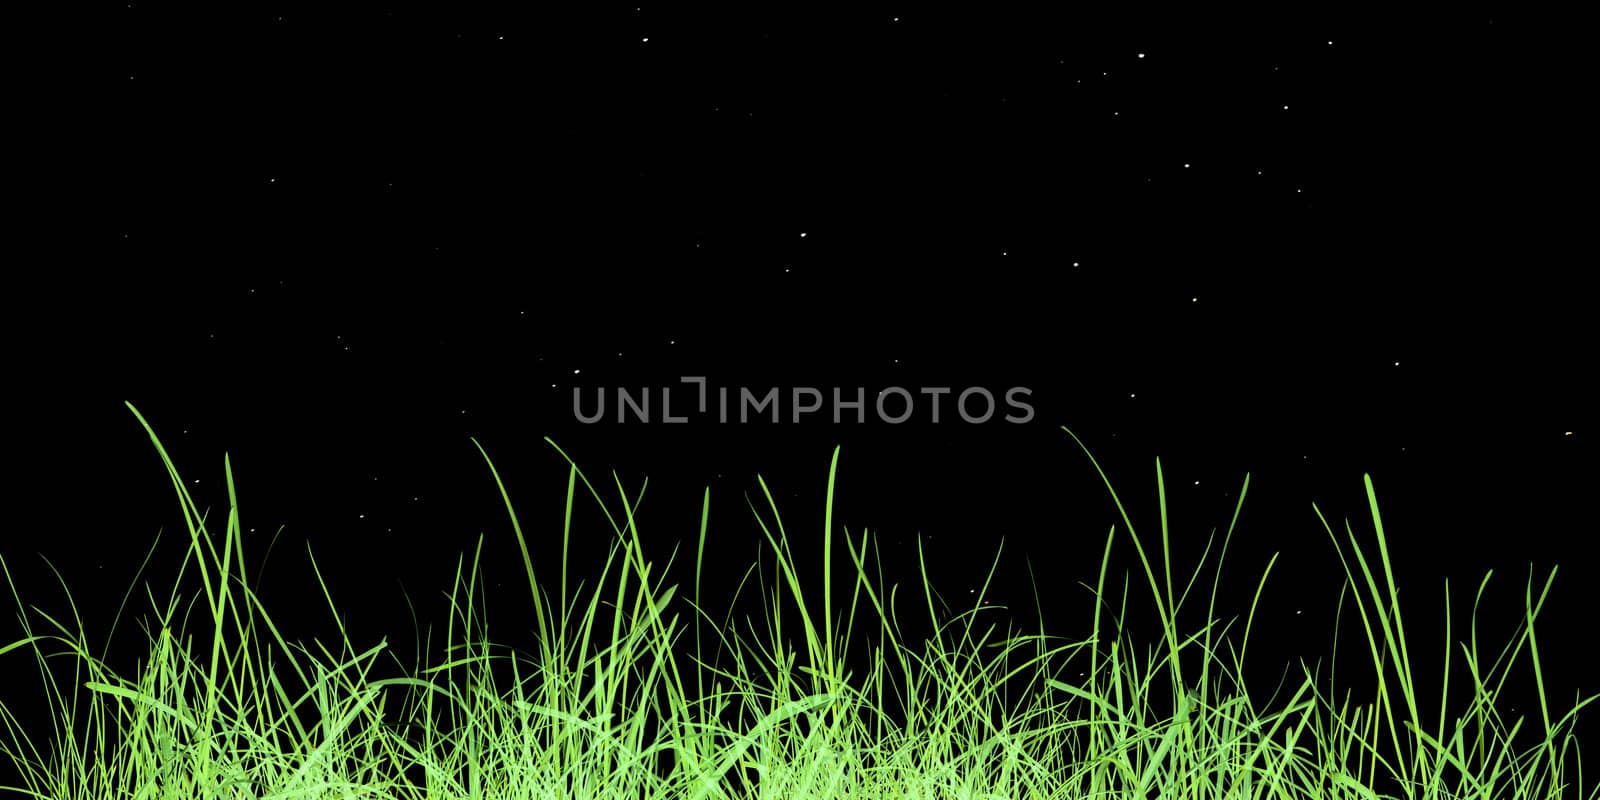 Green grass meadow over black background